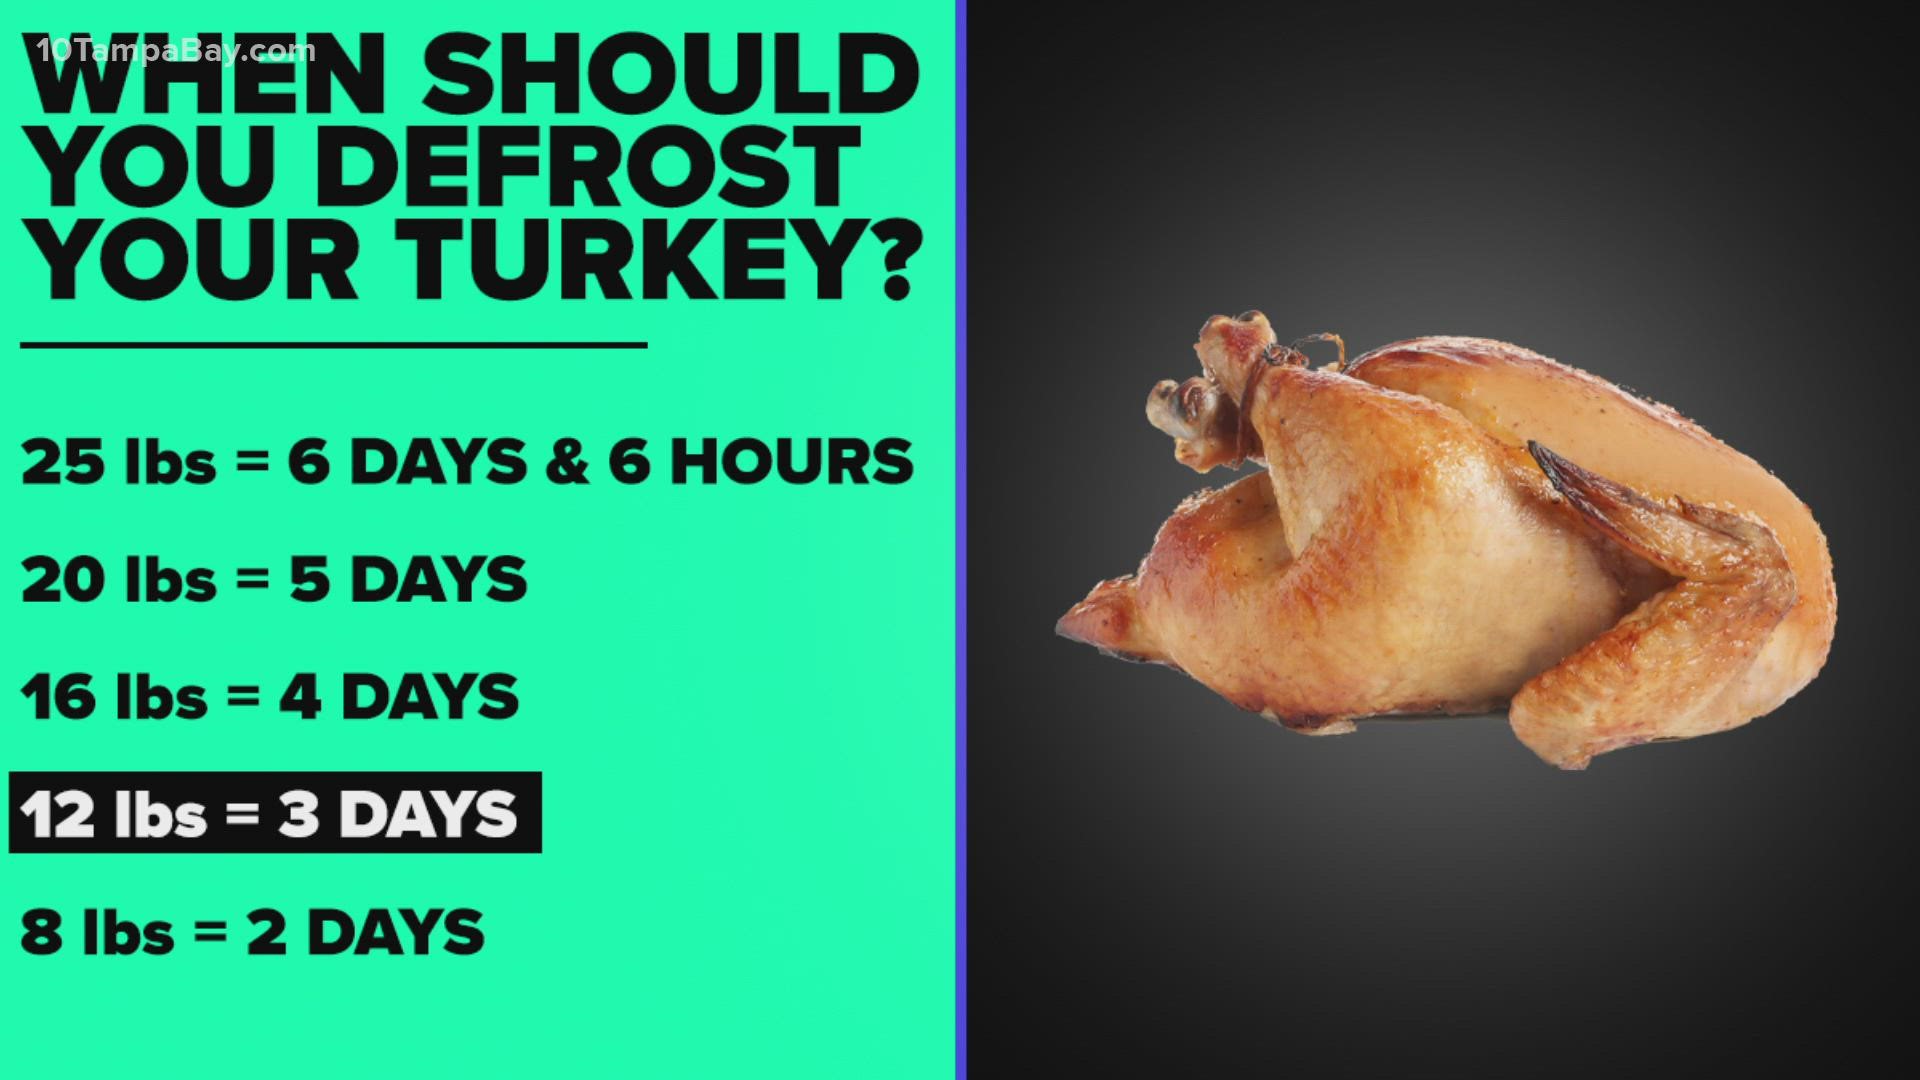 The USDA recommends allocating 24 hours of thaw time in the refrigerator for every 4-5 pounds of frozen turkey.